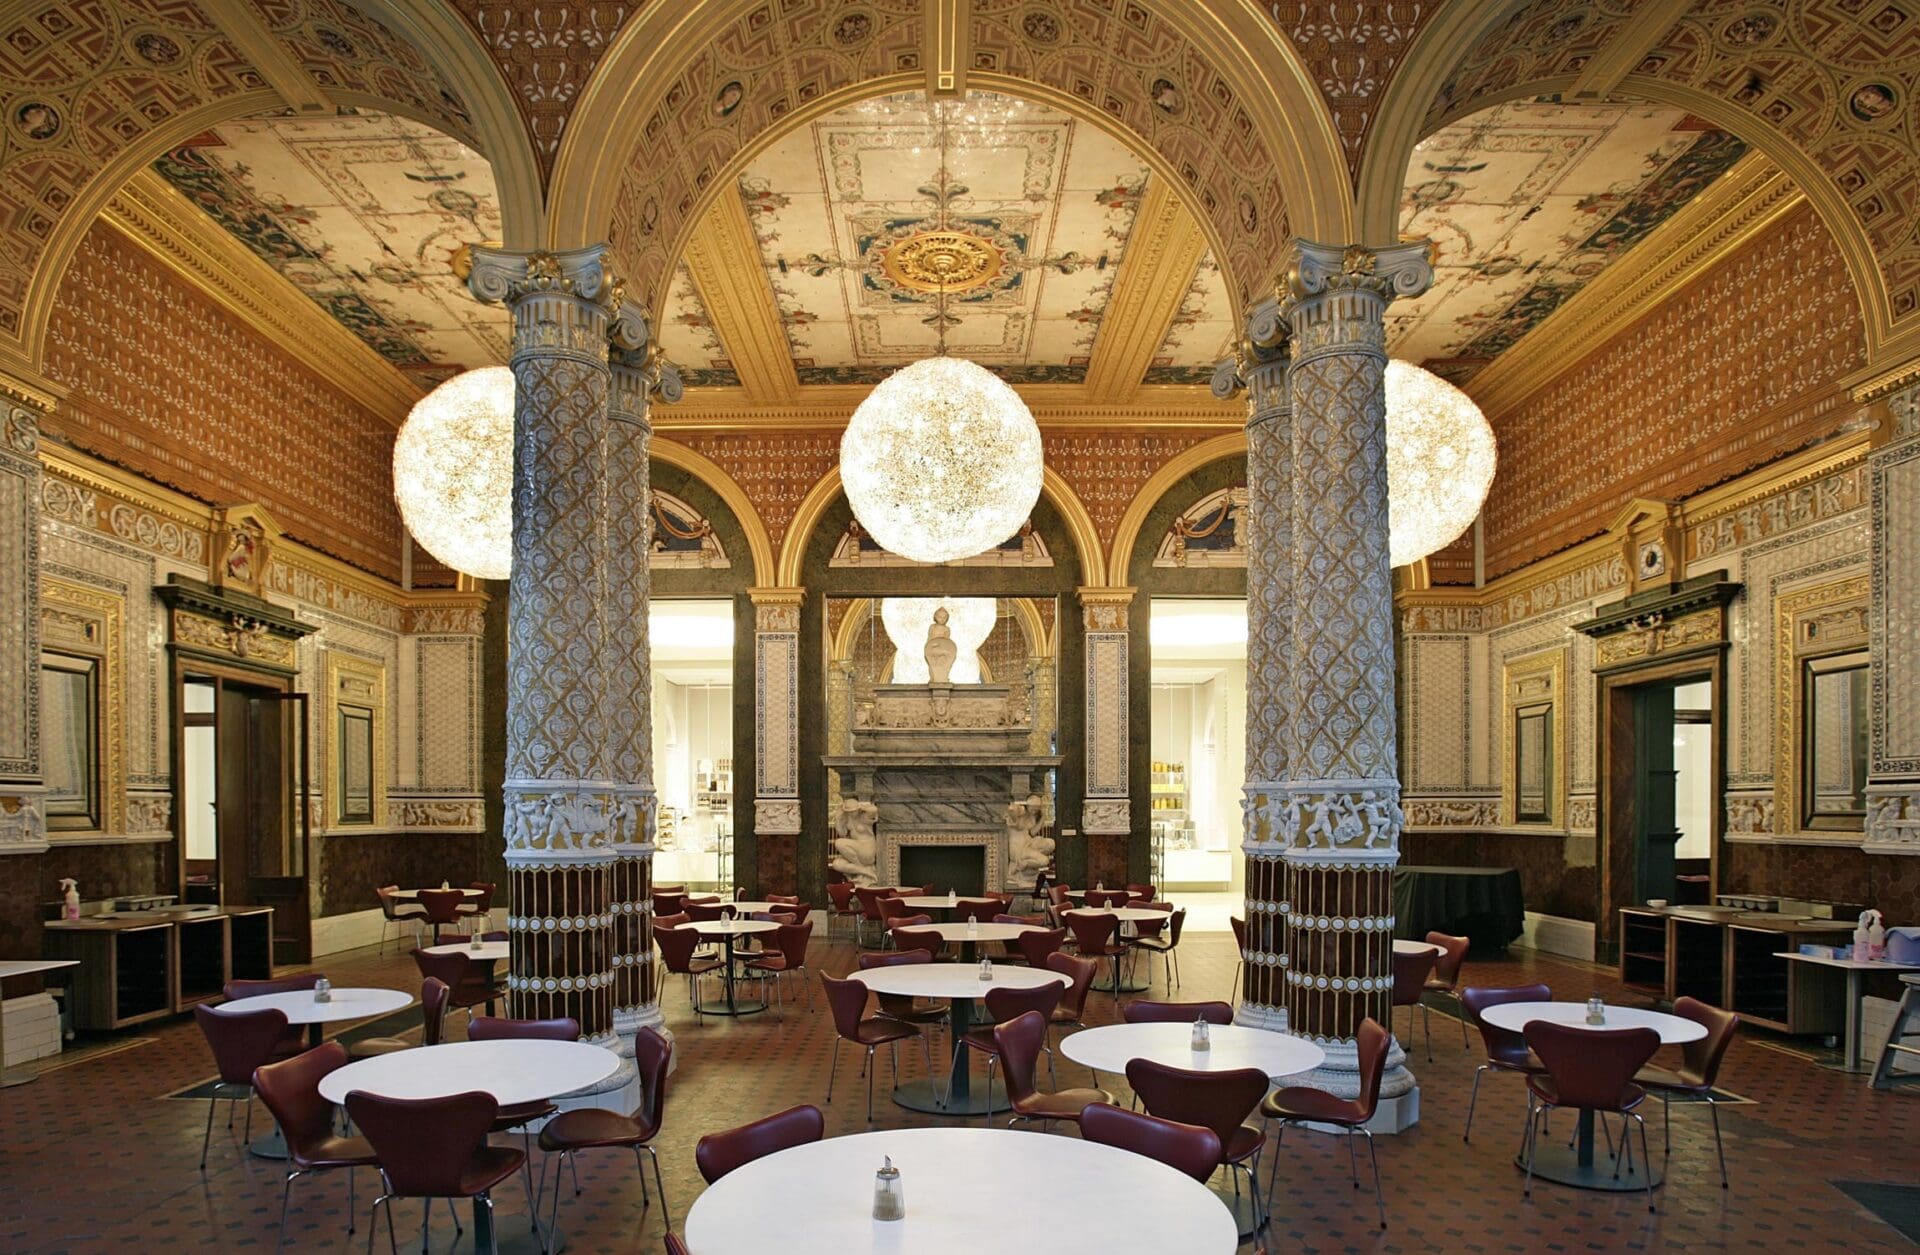 The best museums and galleries in London | An interior view of the ornate cafe inside the Victoria and Albert Museum.